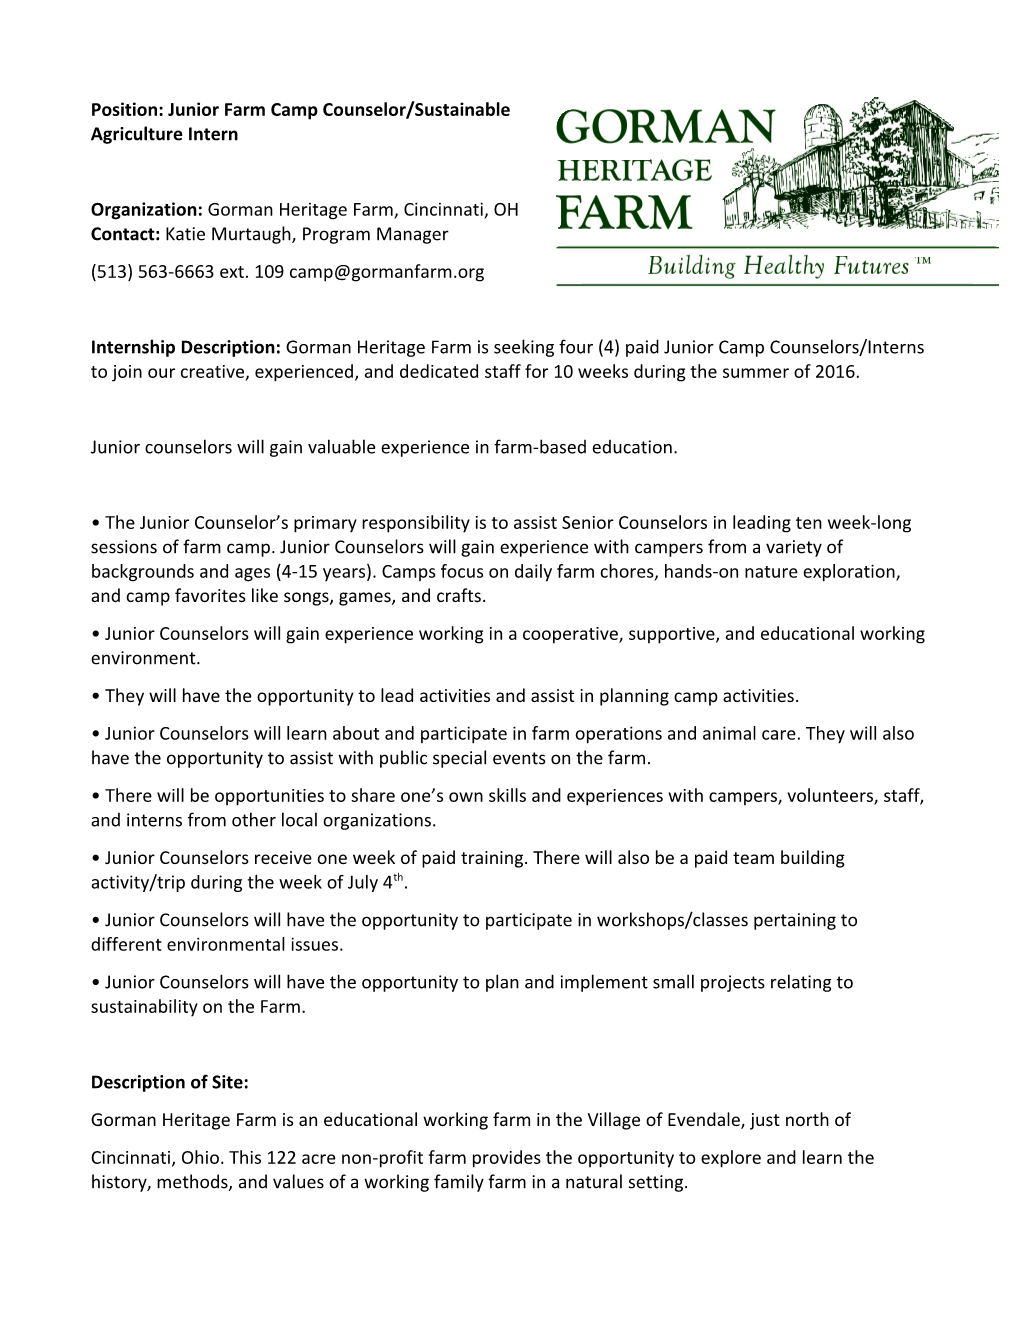 Junior Counselors Will Gain Valuable Experience in Farm-Based Education